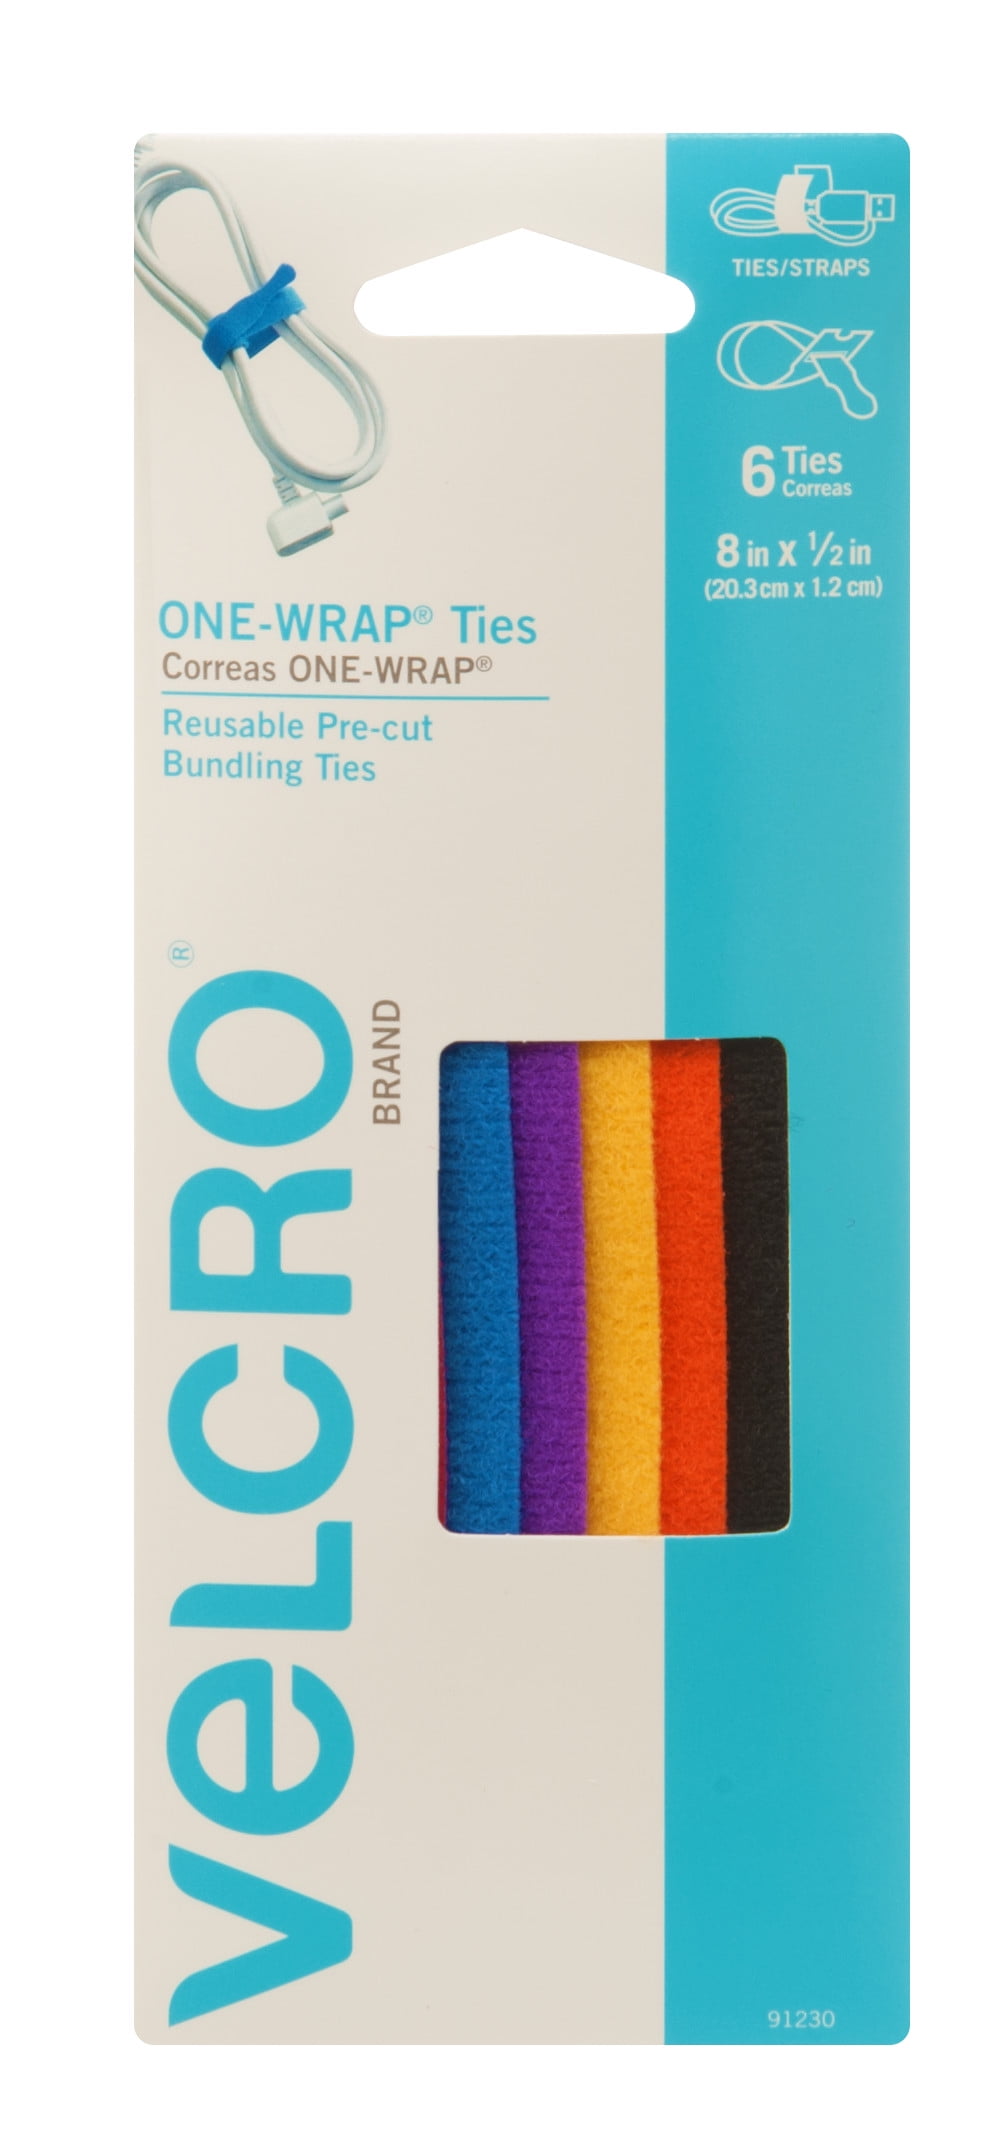 VELCRO Brand One-Wrap Cable Ties, Arts, Crafts, Wires and Cords